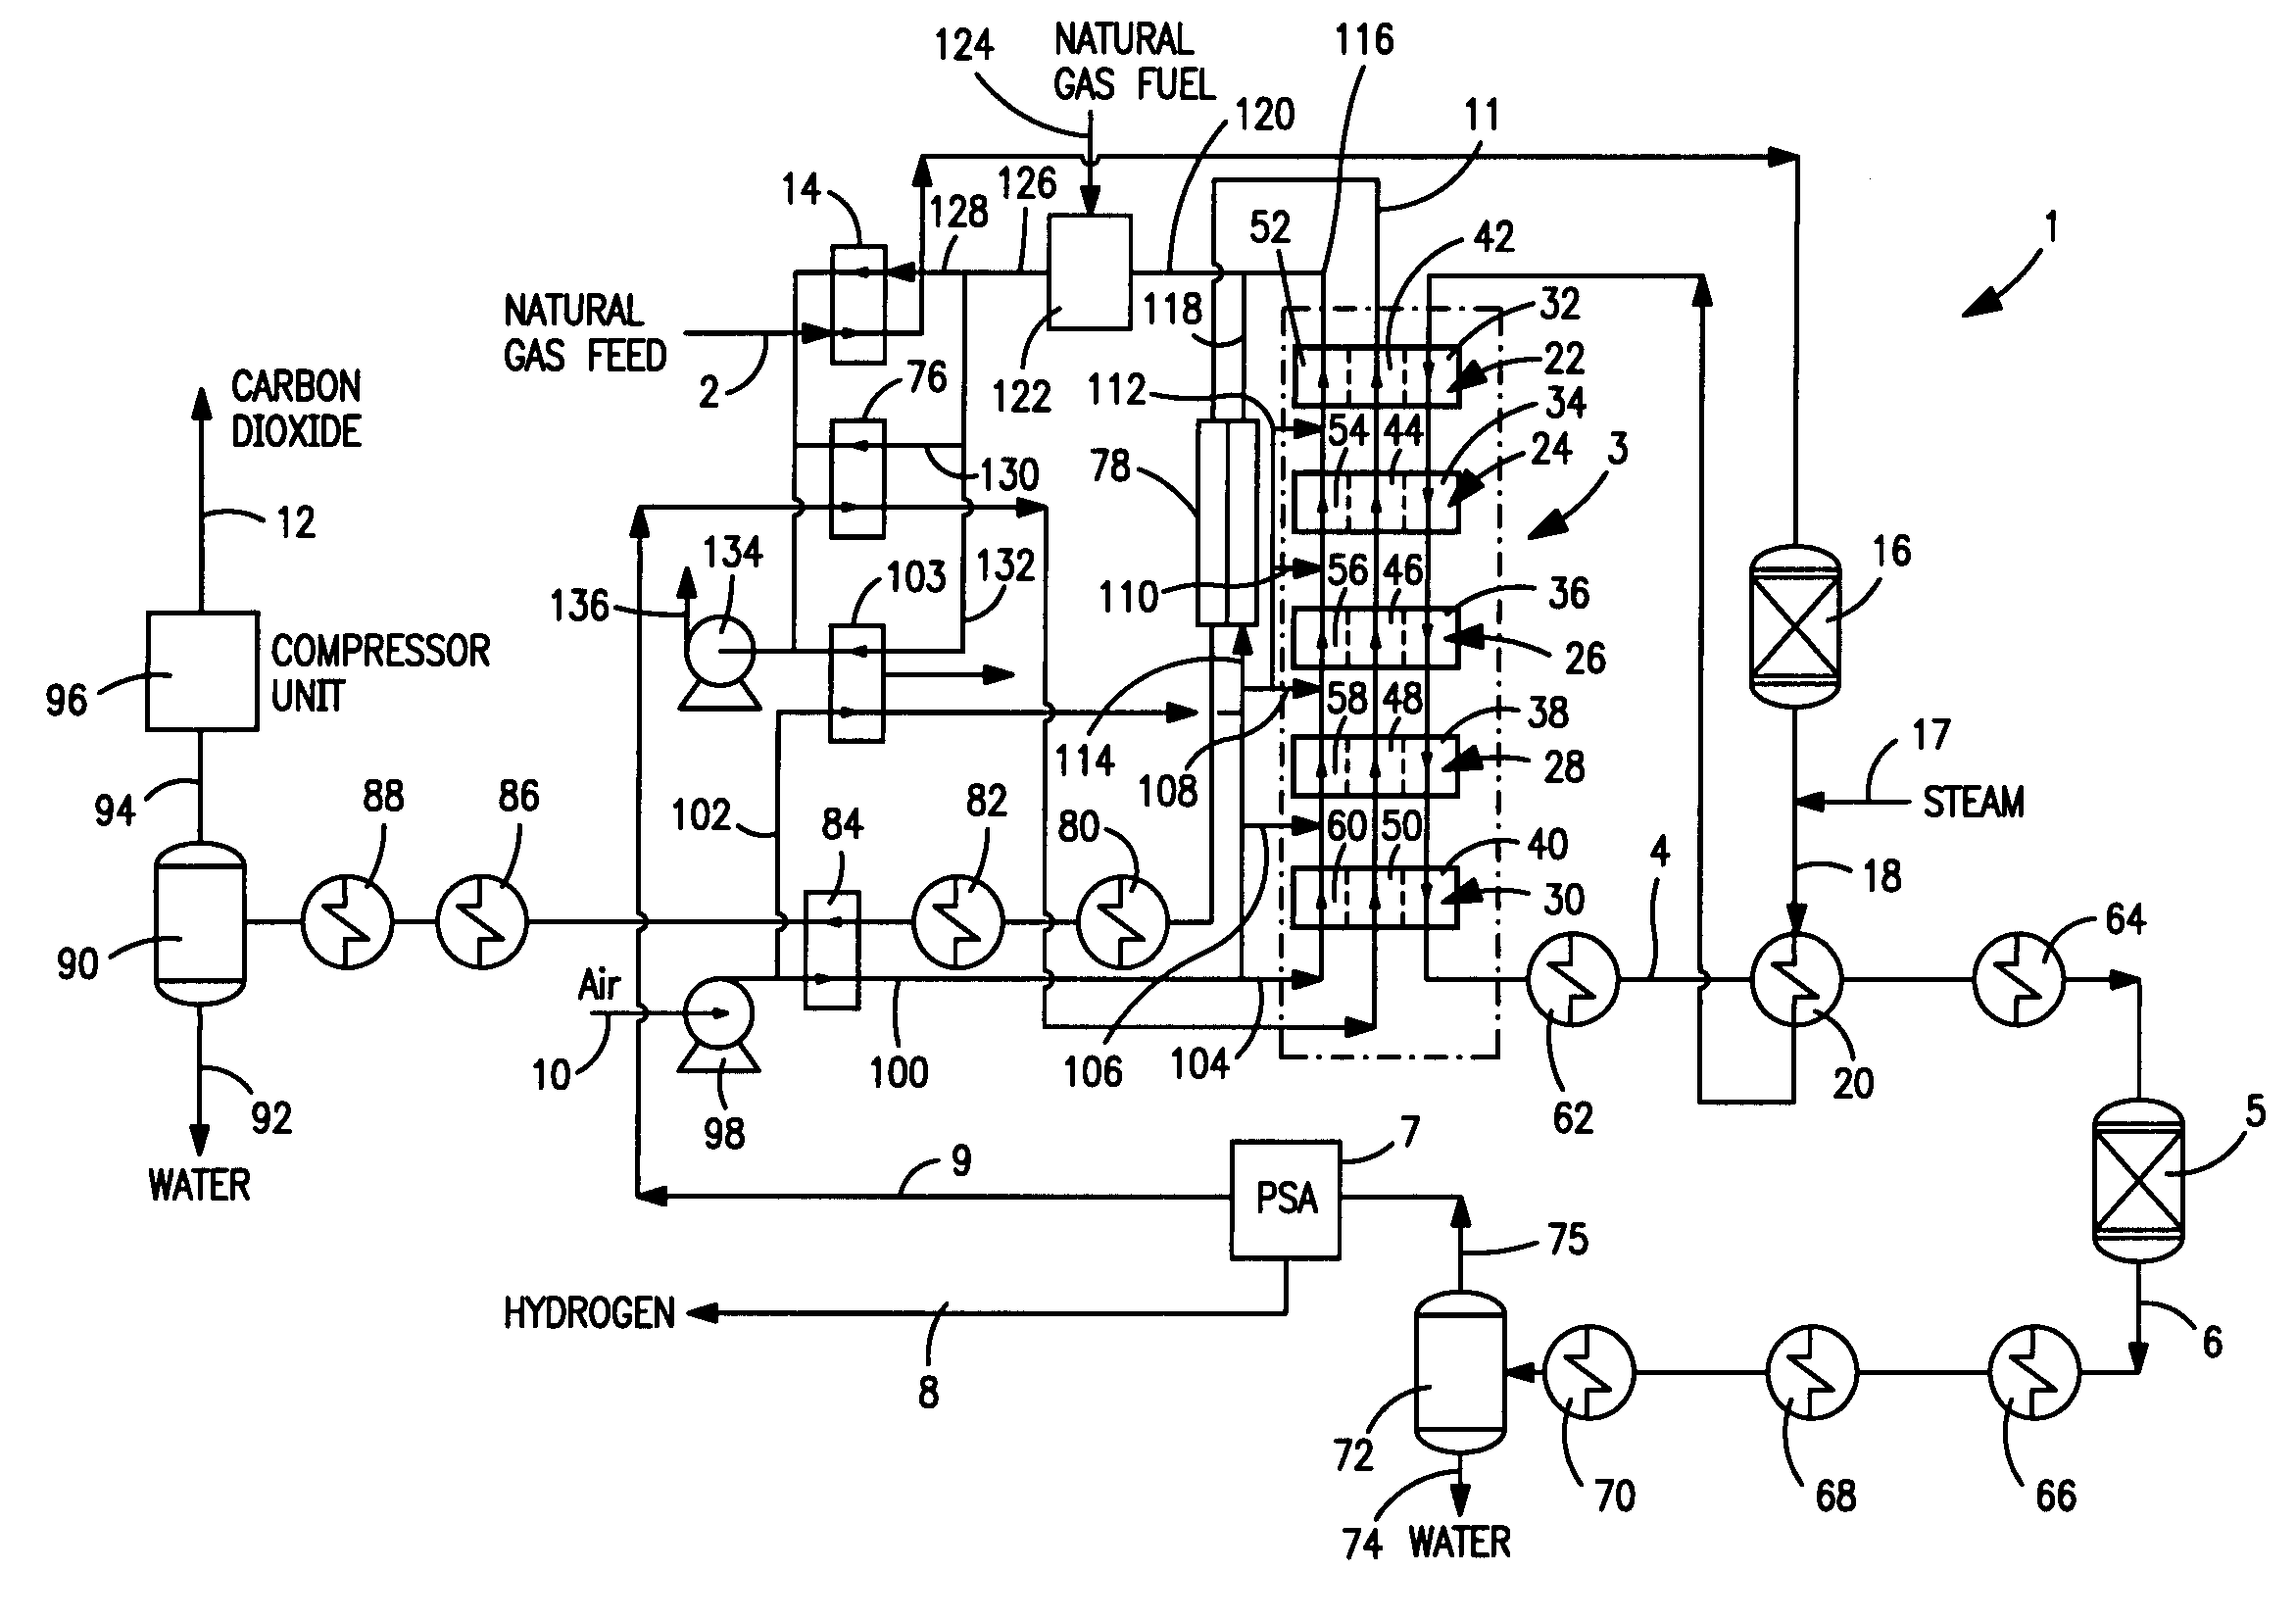 Method and apparatus for producing synthesis gas